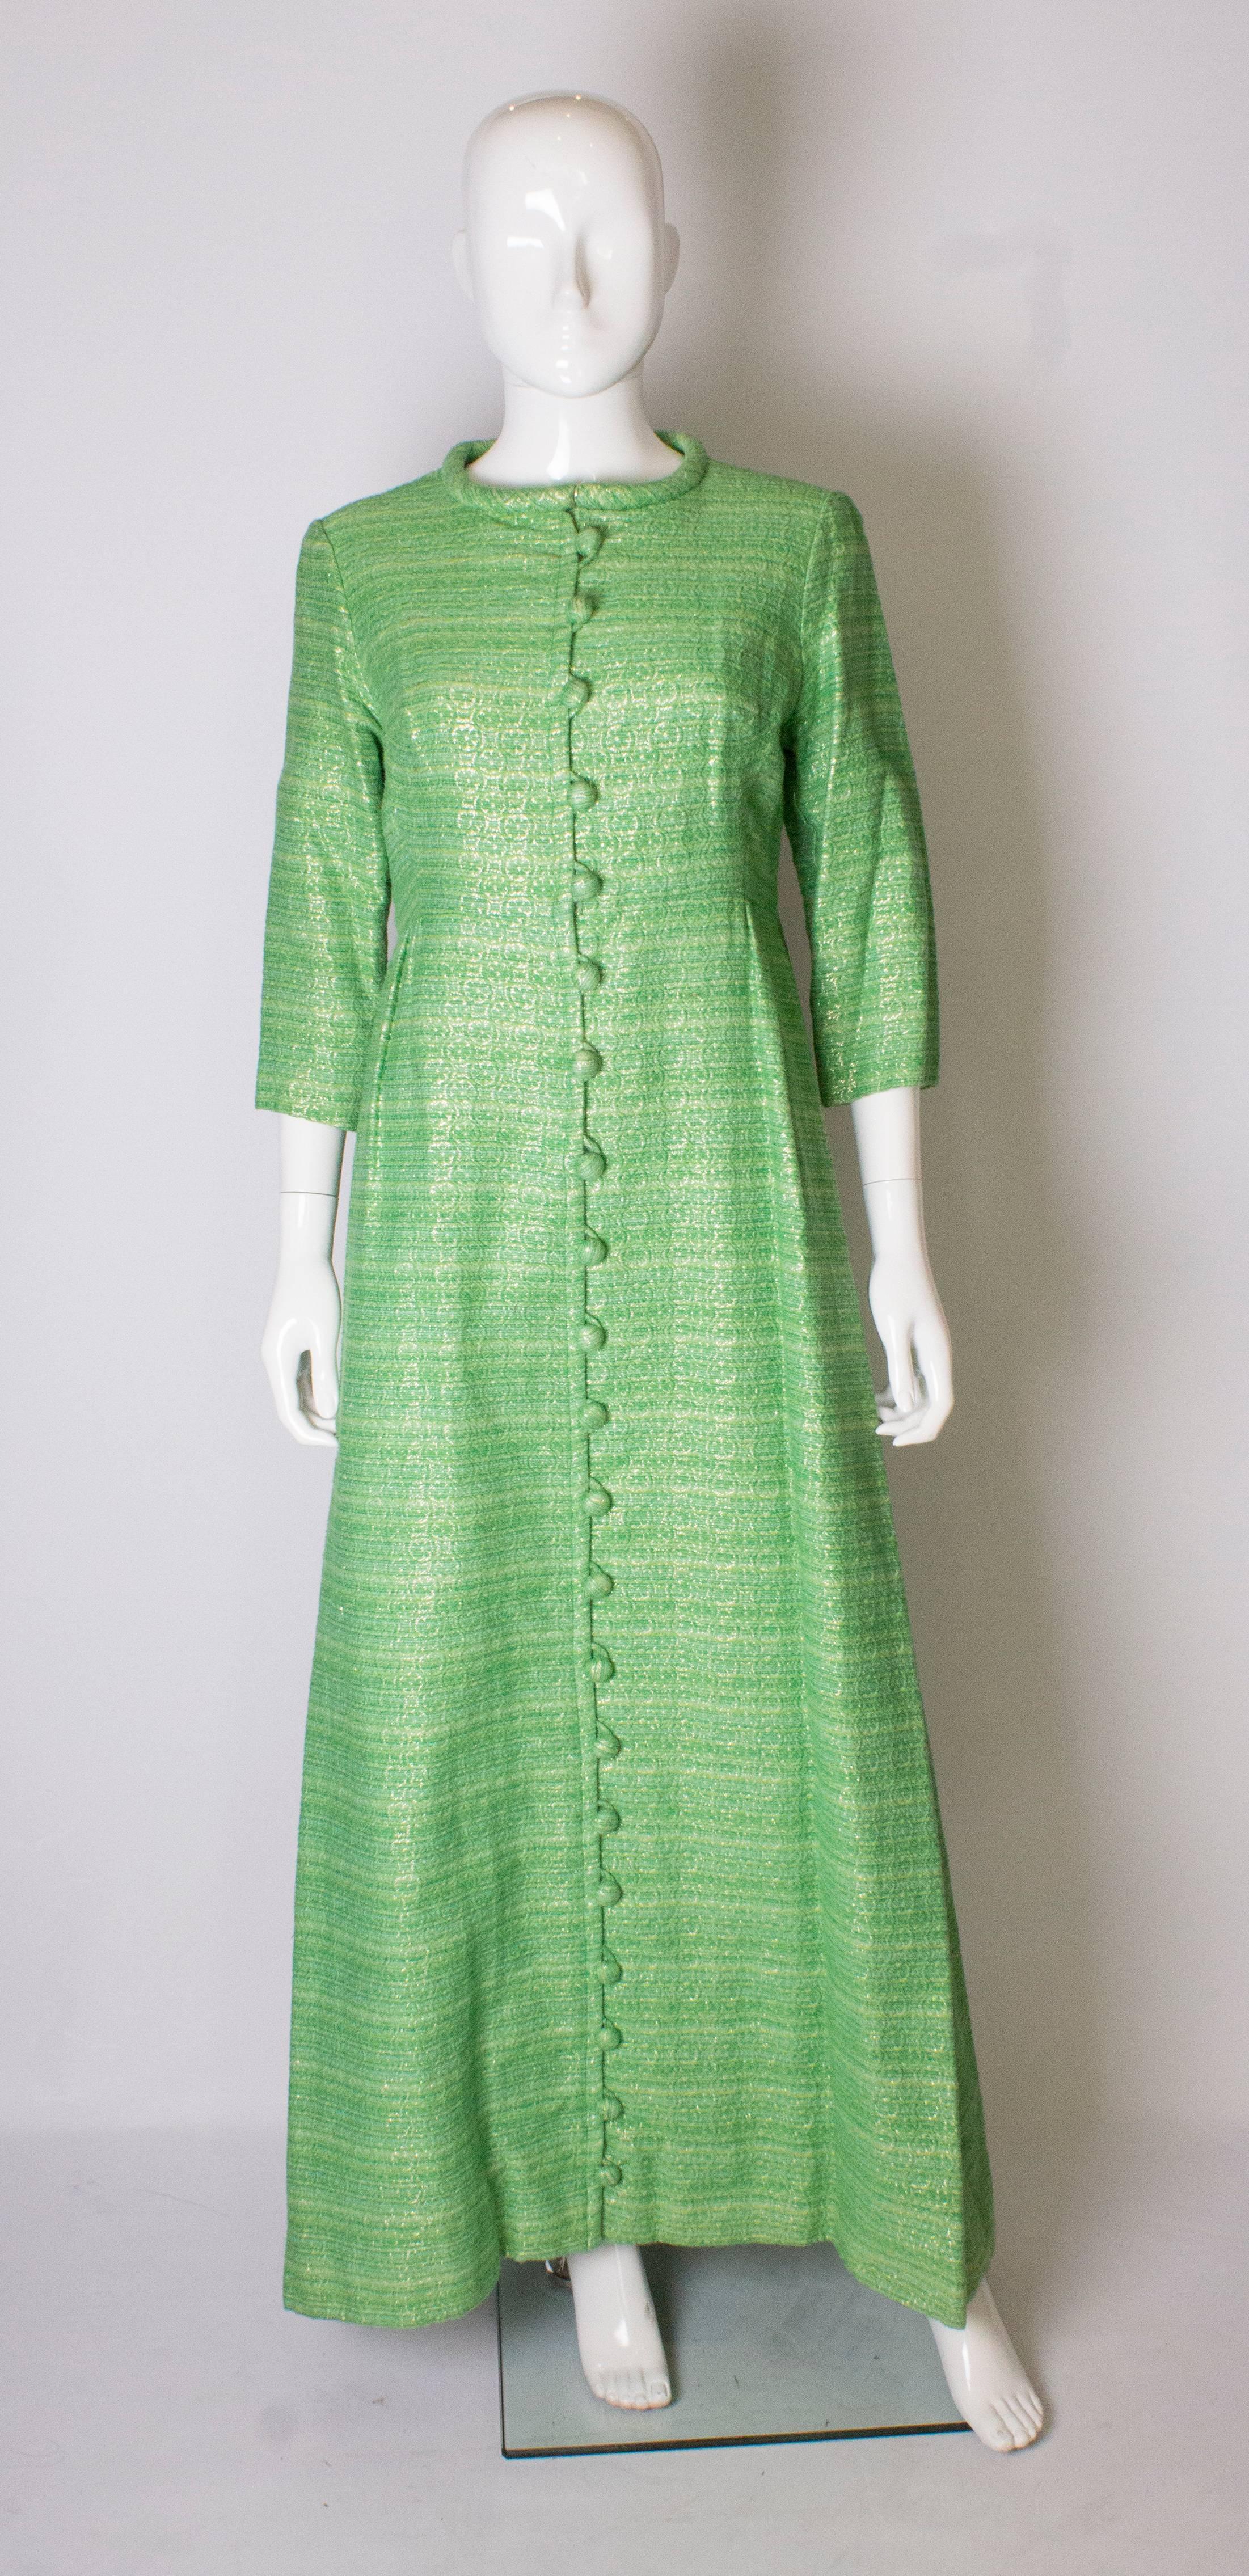 A chic green coat dress  by Pierre Celeyre. The coat dress has a round neck , elbow length sleeve, and gathering at the waist. It is fully lined.